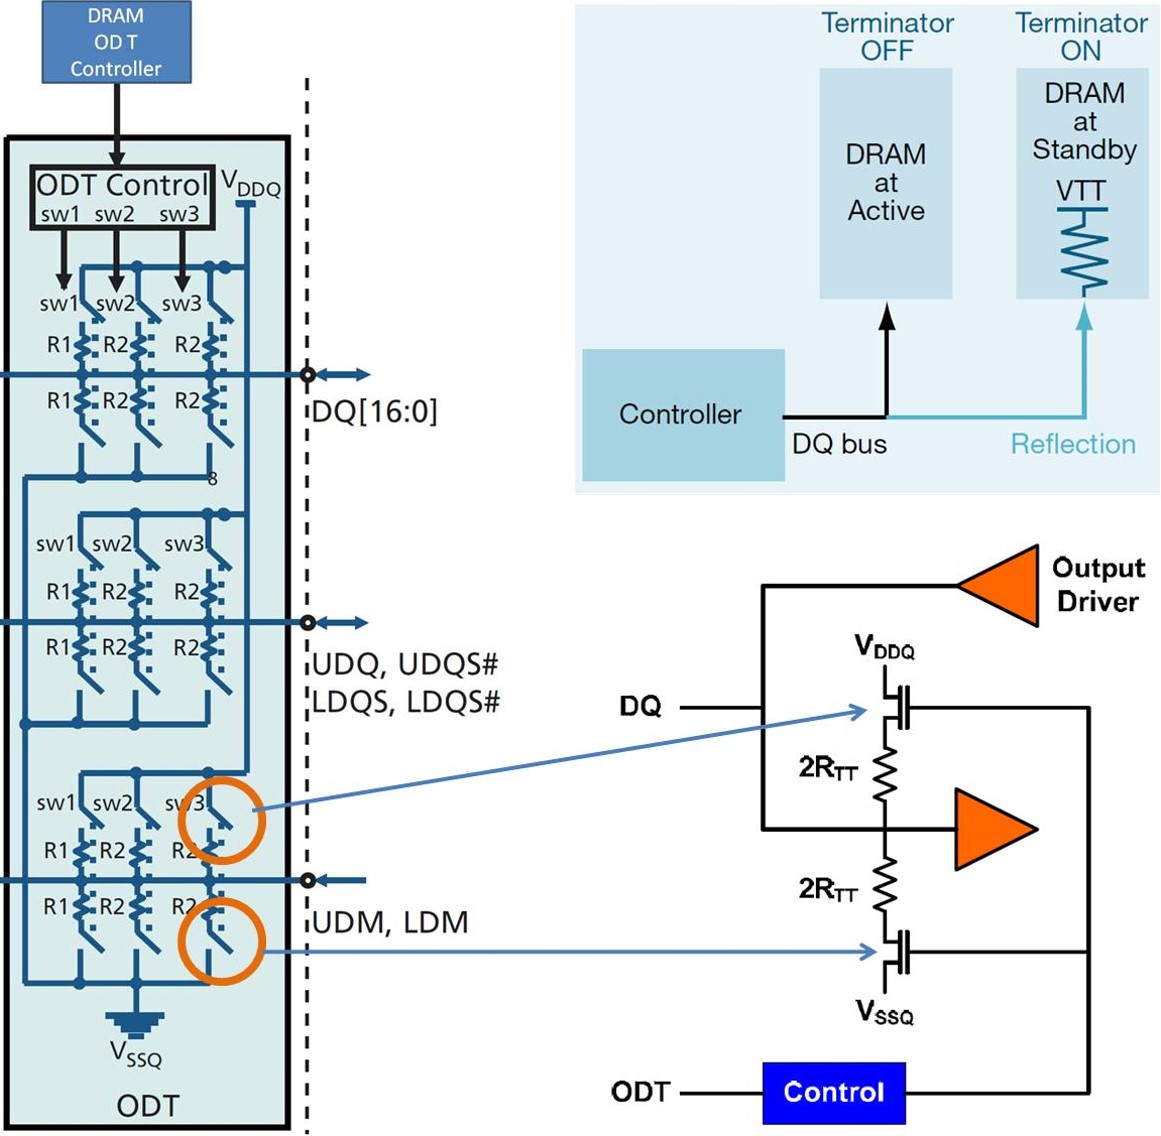 Functional Representation of ODT in DRAM I/O driver & simplified circuits